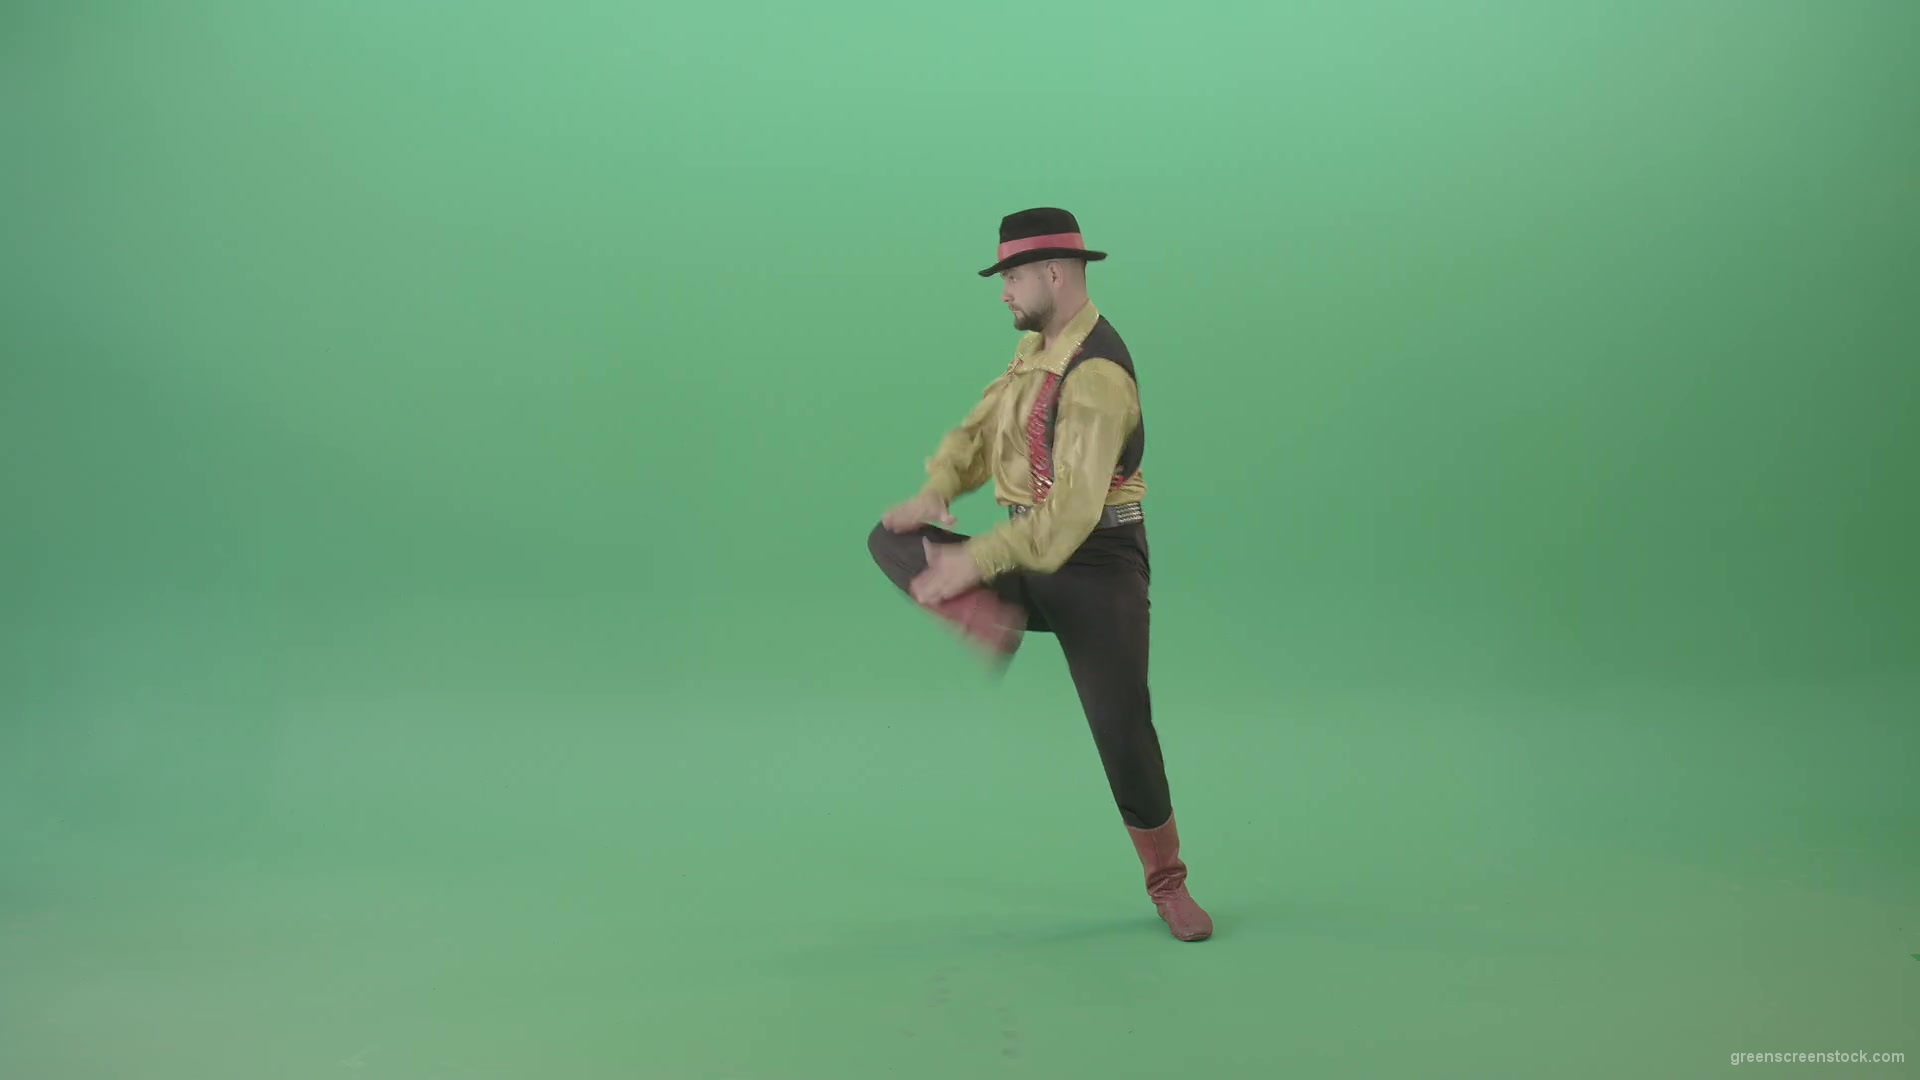 Moldova-man-dancing-with-clapping-isolated-on-Green-Screen-4K-Video-Footage-1920_006 Green Screen Stock